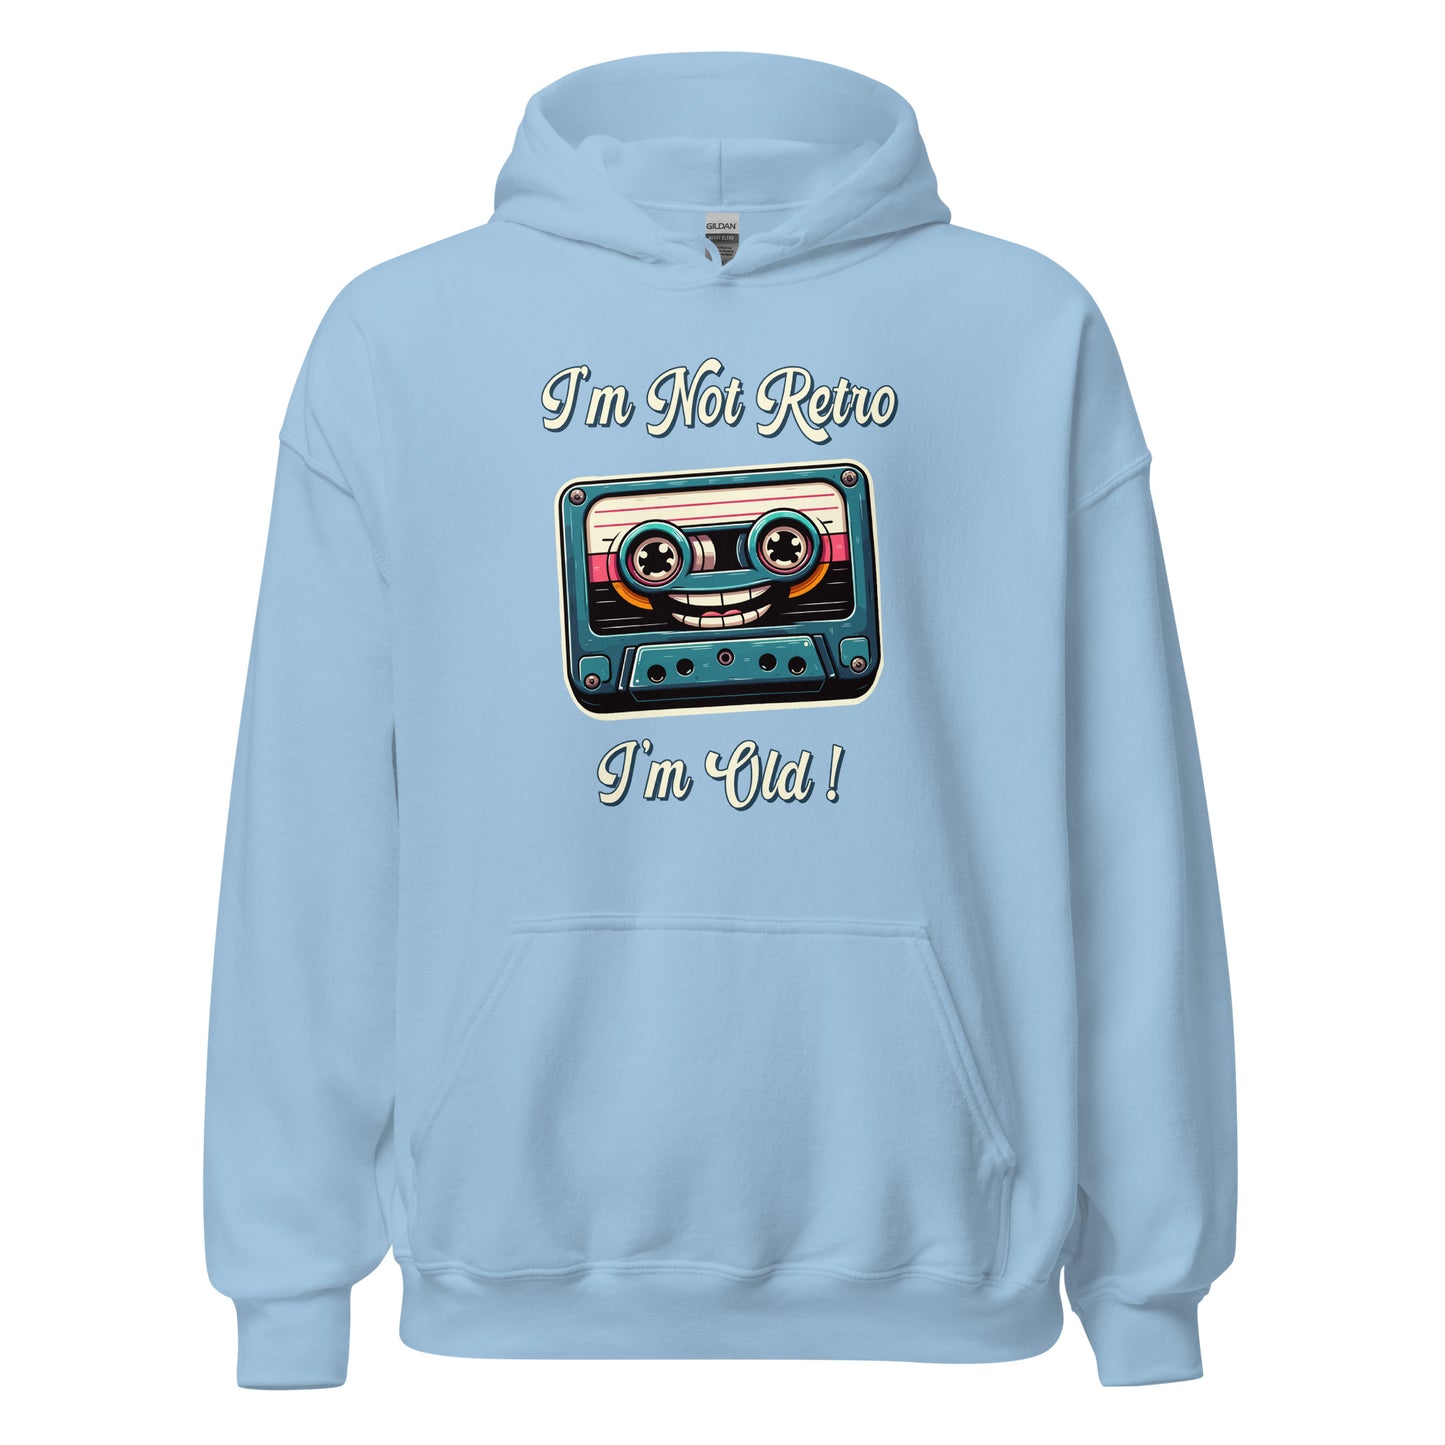 Im not retro im old casette tape hoodie printed by Whistler Shirts with a cassette tape wth a smiley face